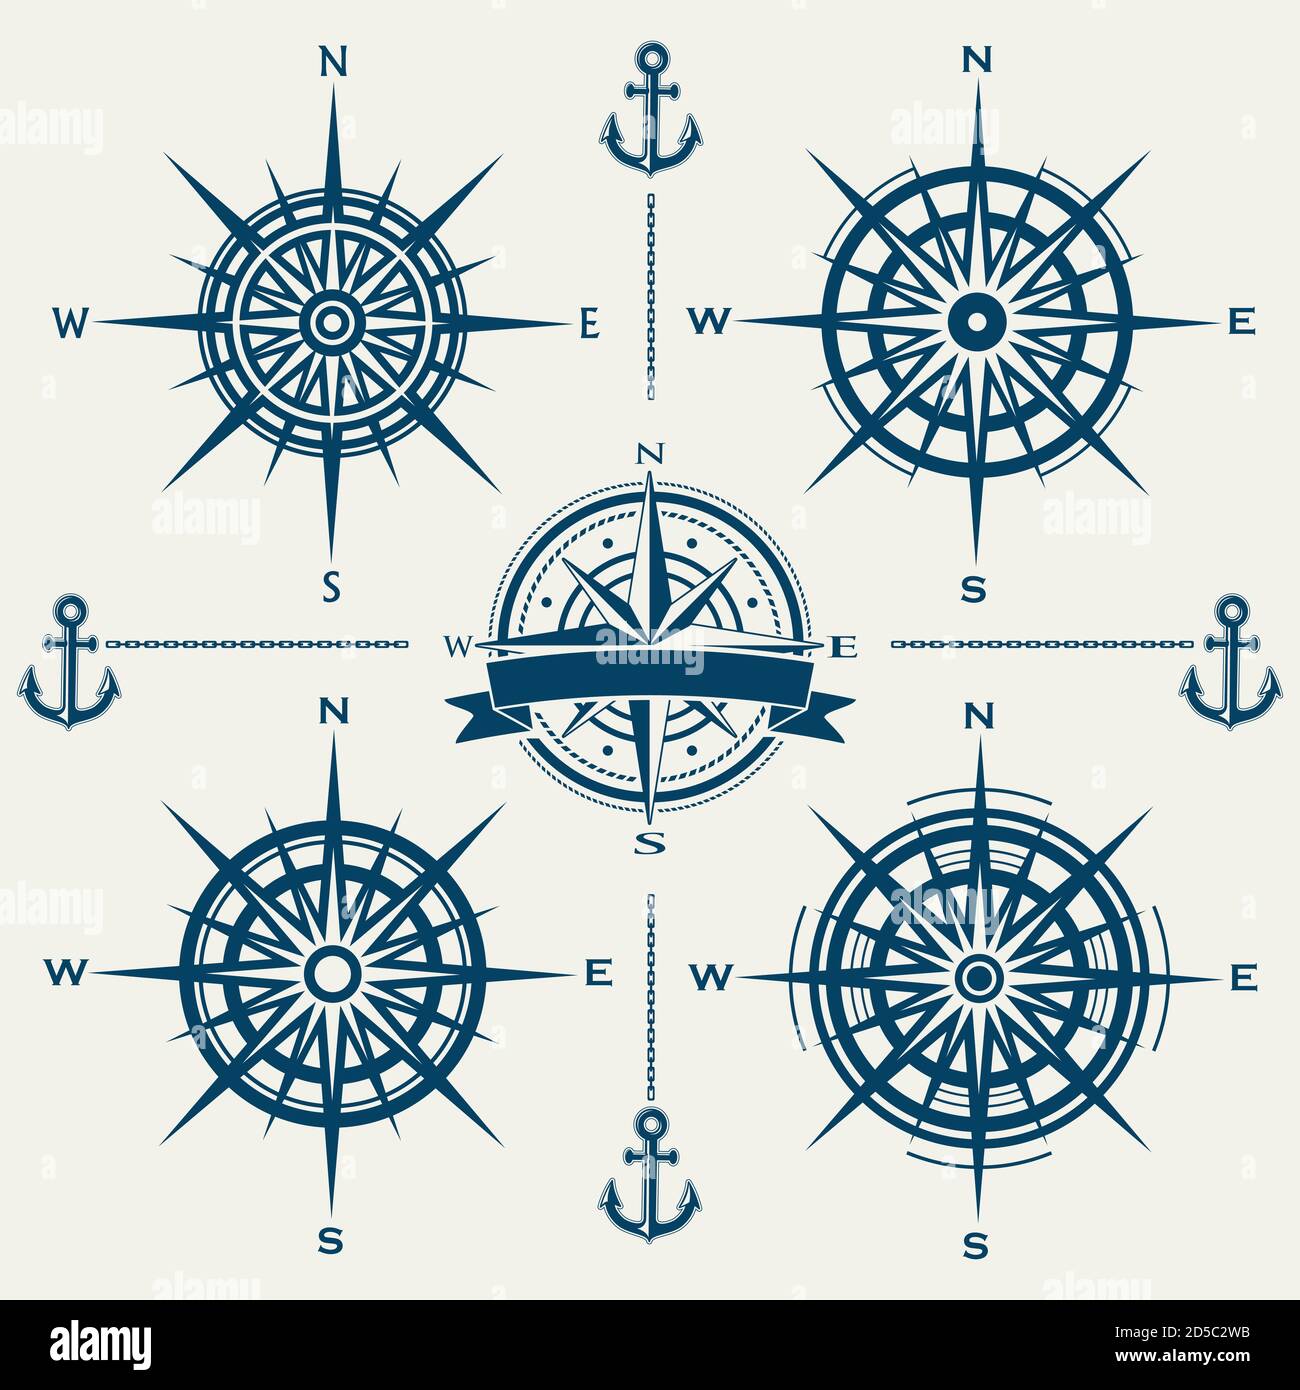 Set of vector compass roses or wind roses Stock Vector